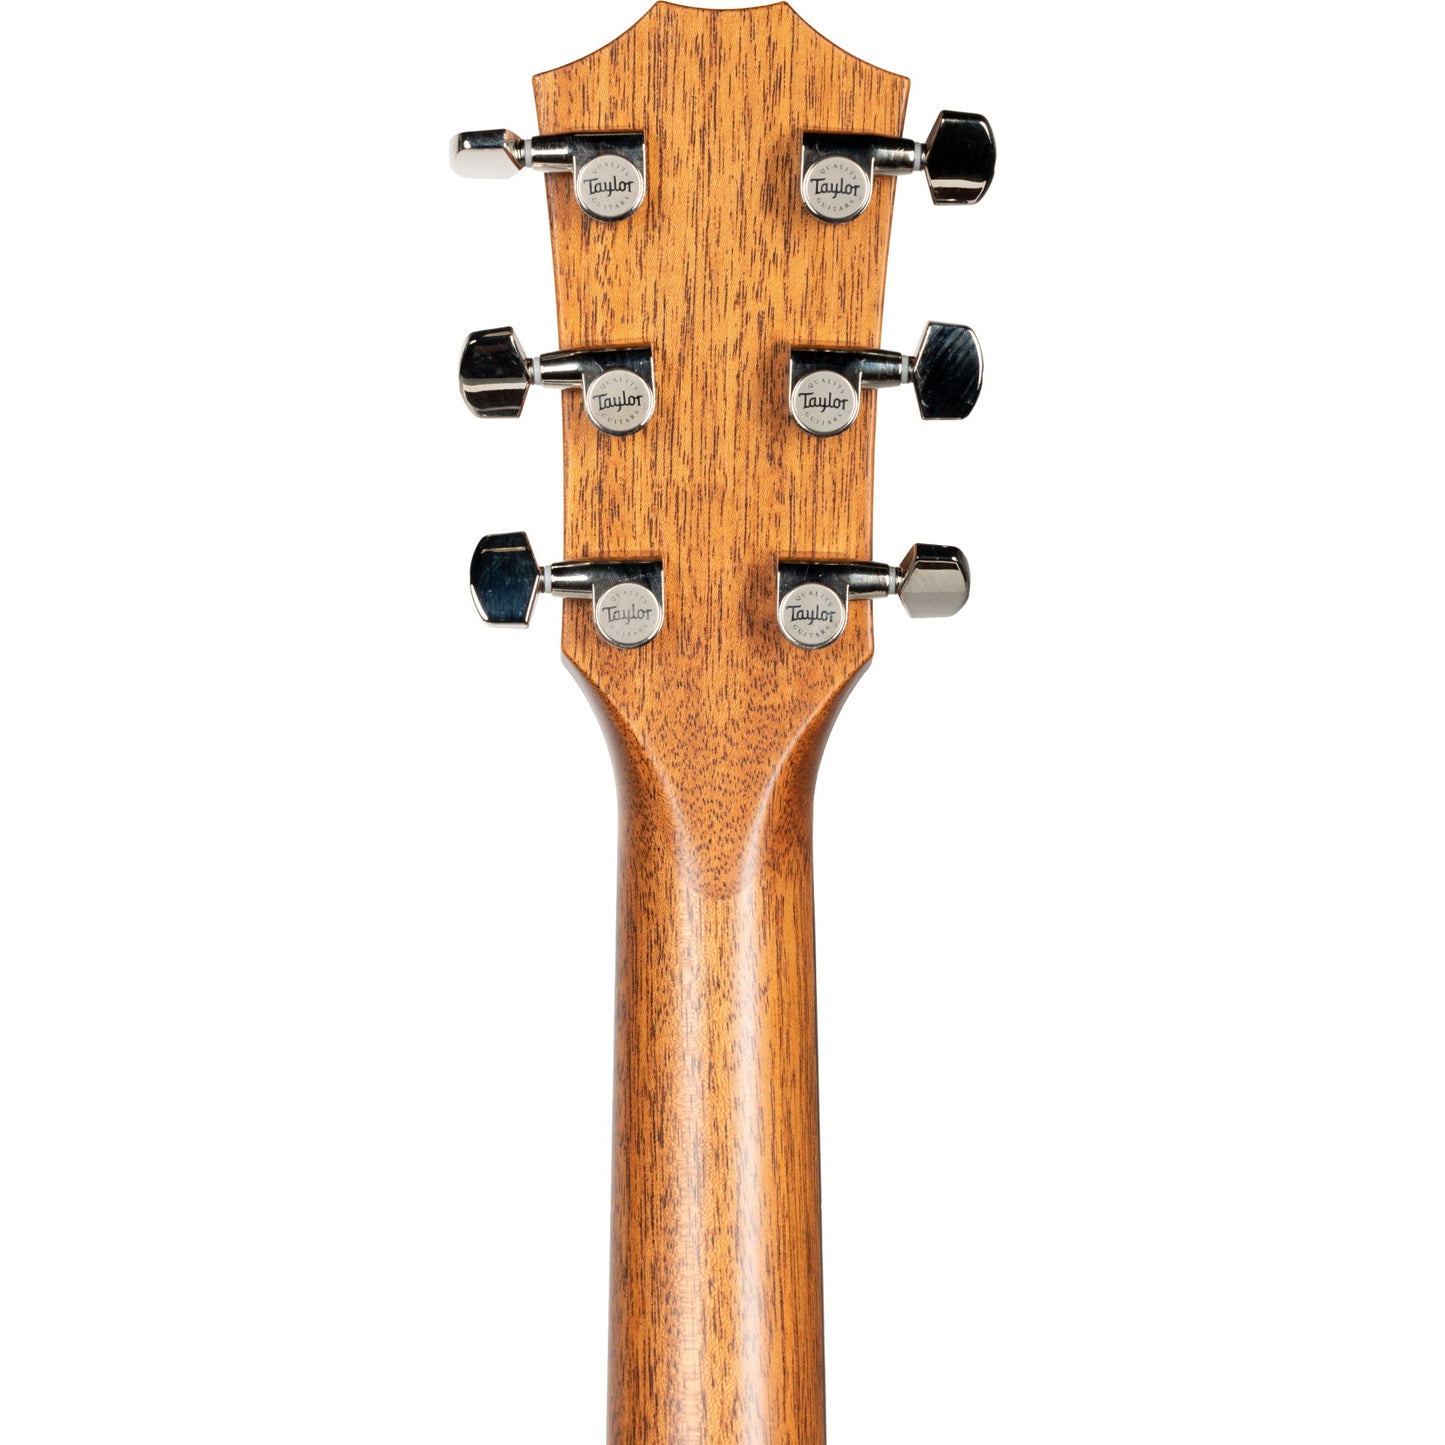 Taylor Builder’s Edition 717e Acoustic Electric Guitar in Wild Honey Burst